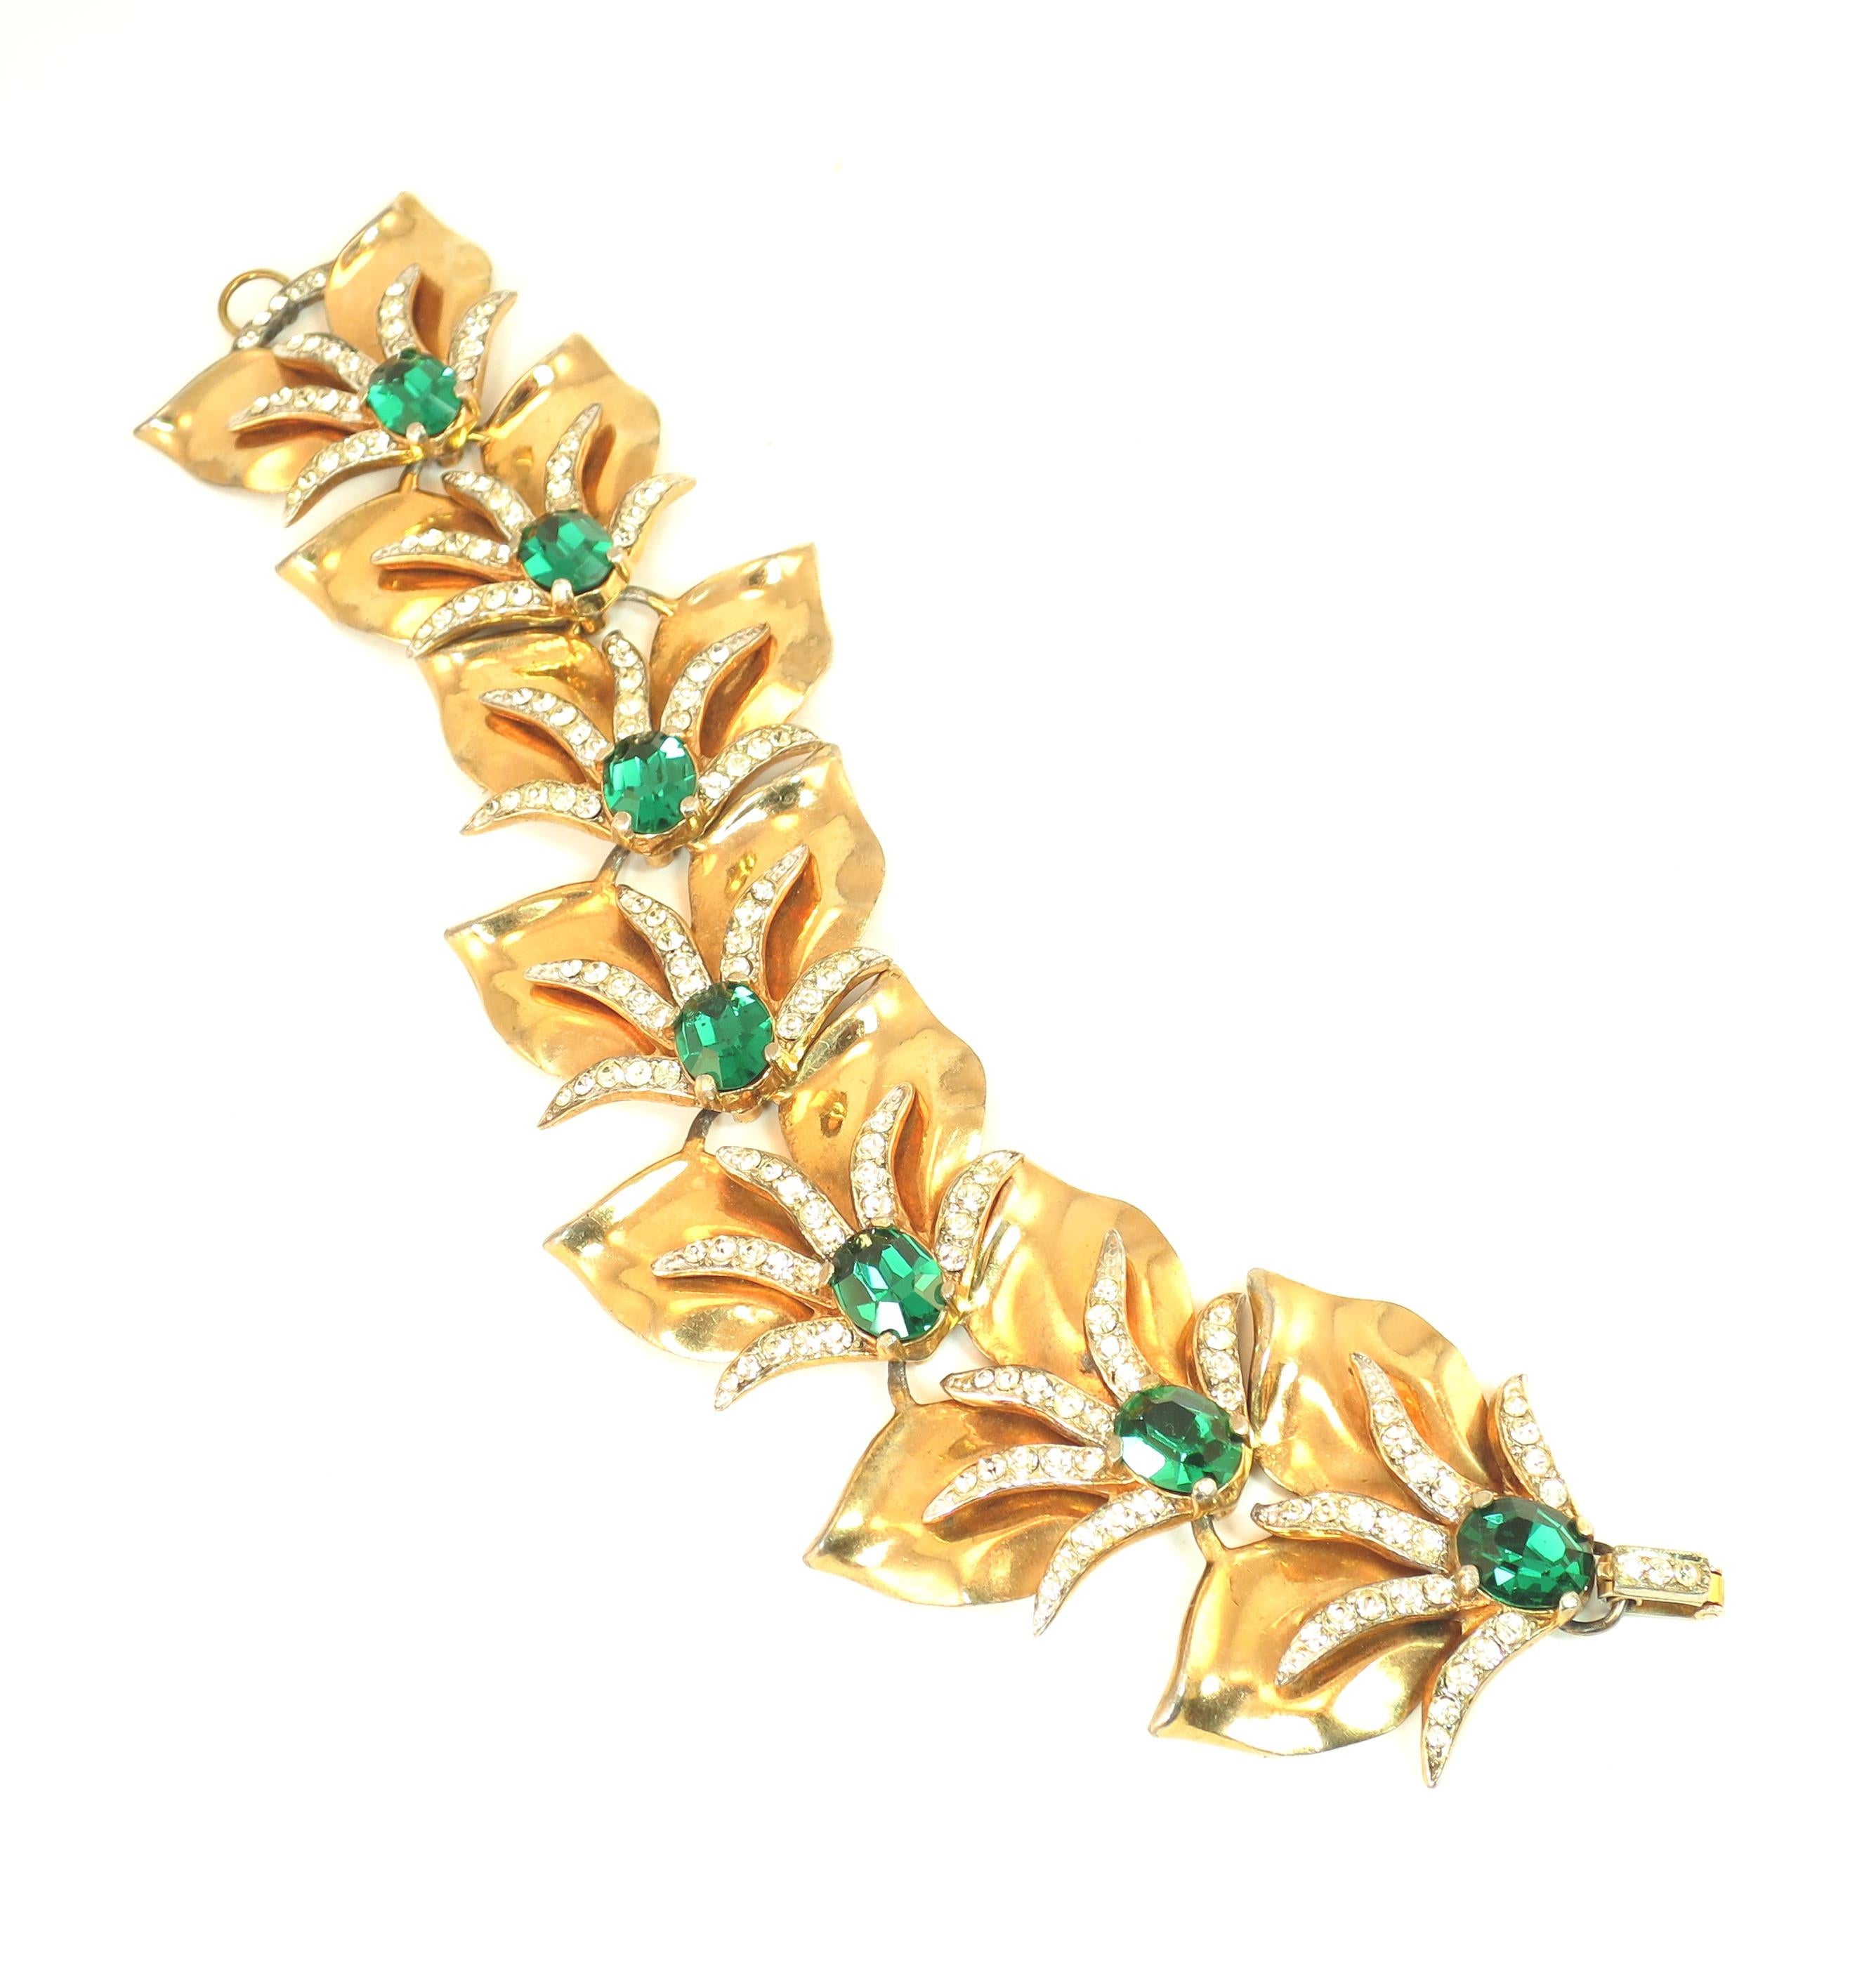 Offered here is a massive Modernist abstract gold-plated emerald crystal bracelet from the 1940s. The construction consists of seven solid platforms connected by built-in links and hooks; each section expresses a stylized double-leaf design